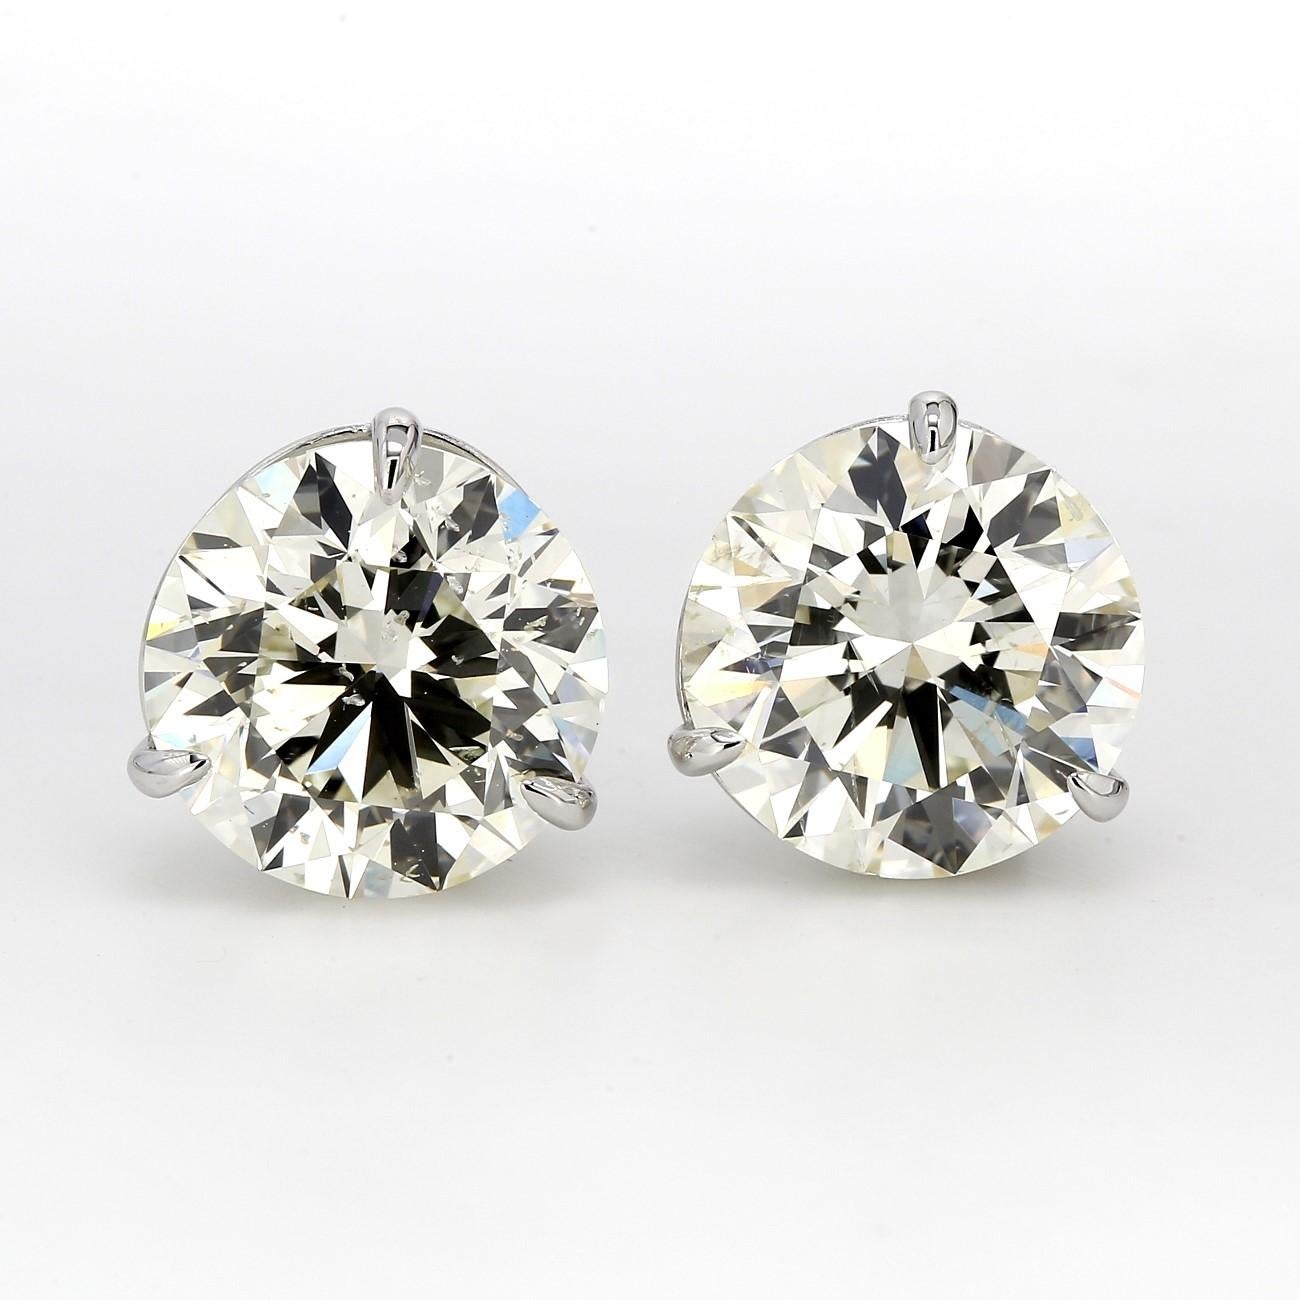 Screwback stud earrings in white gold with prong set GIA certified M/SI2 round diamonds.  D7.06ct.t.w.